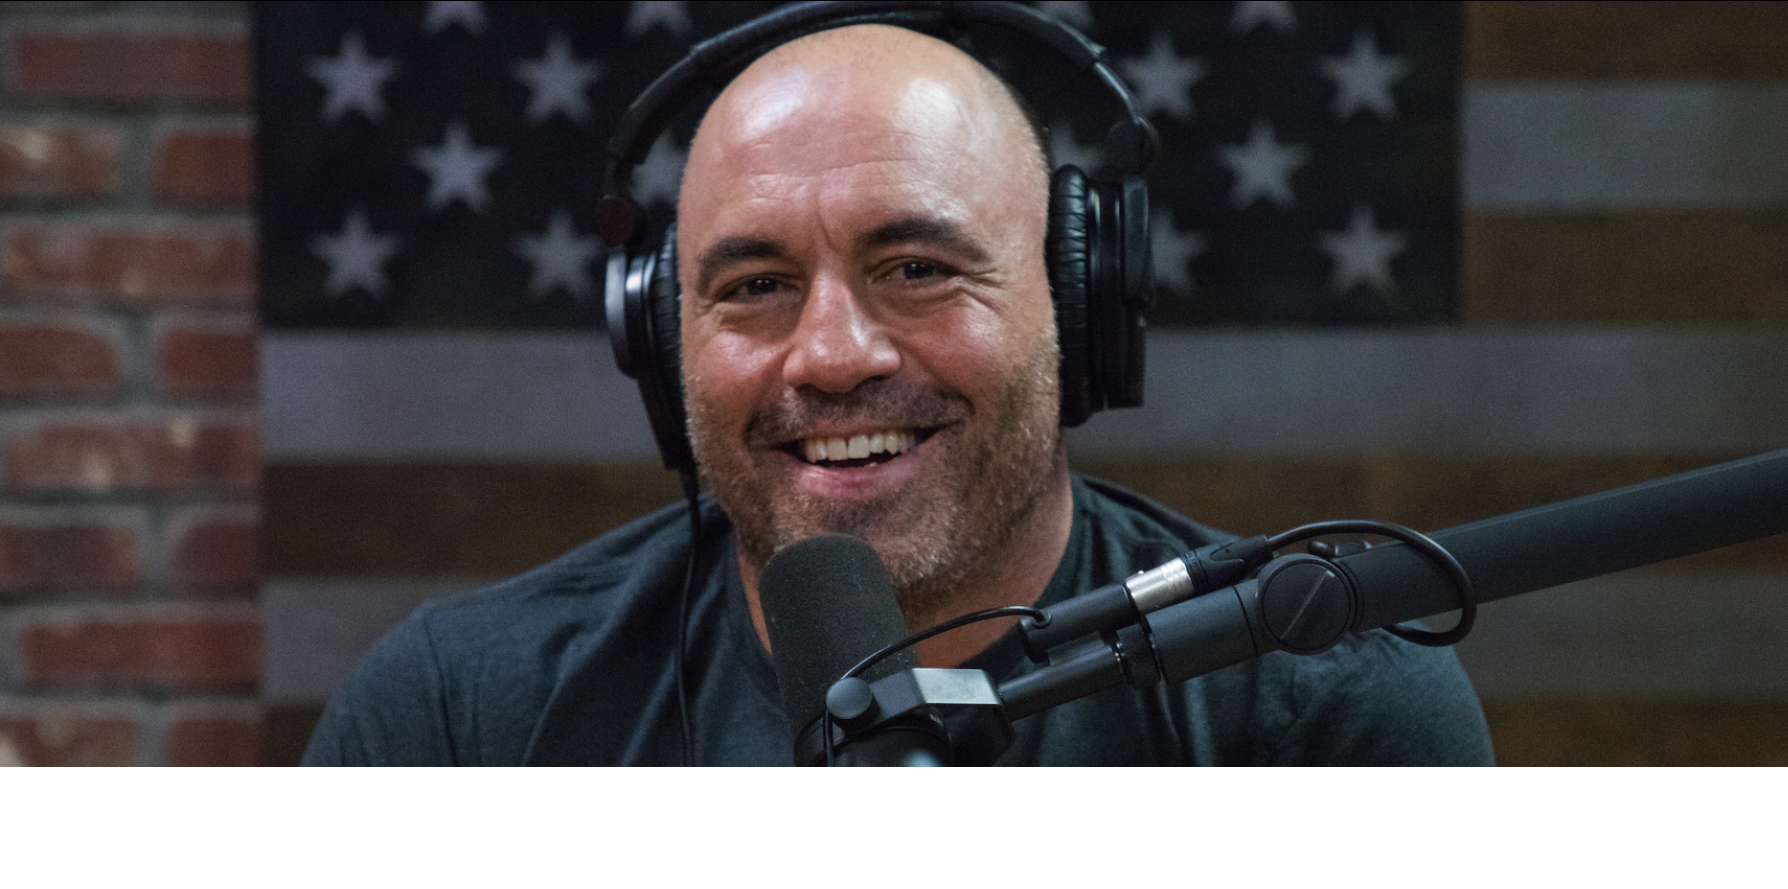 Spotify Signs New Deal With Joe Rogan Worth as Much as $250 Million, But Expands His Distribution to YouTube and More